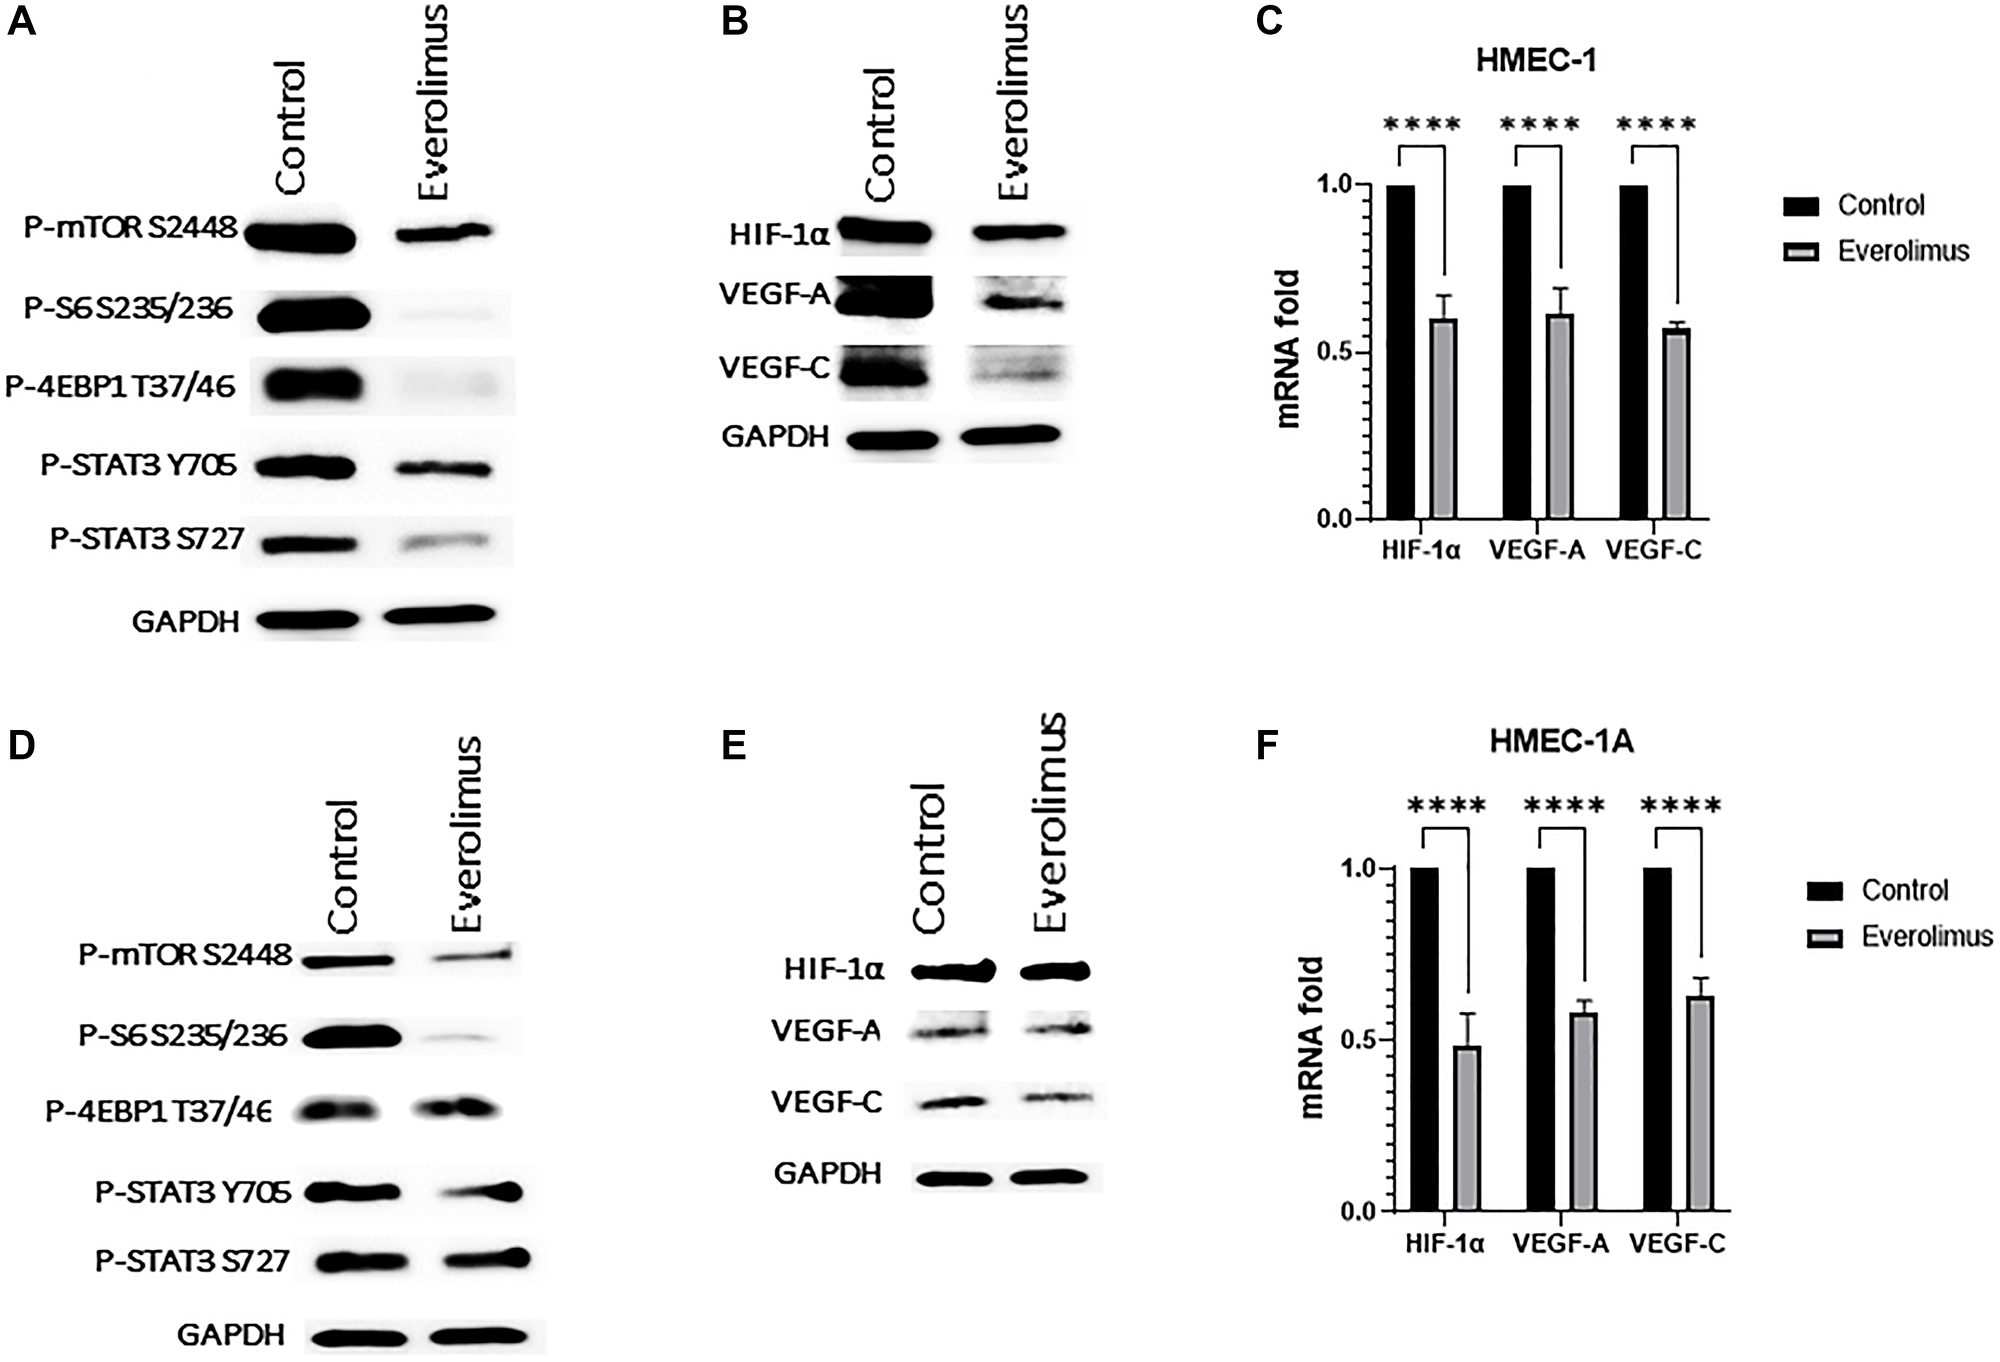 Everolimus inhibits mTORC1/STAT3 pathway and downregulates HIF-1α, VEGF-A and VEGF-C in HMEC-1 and HMEC-1A cells.